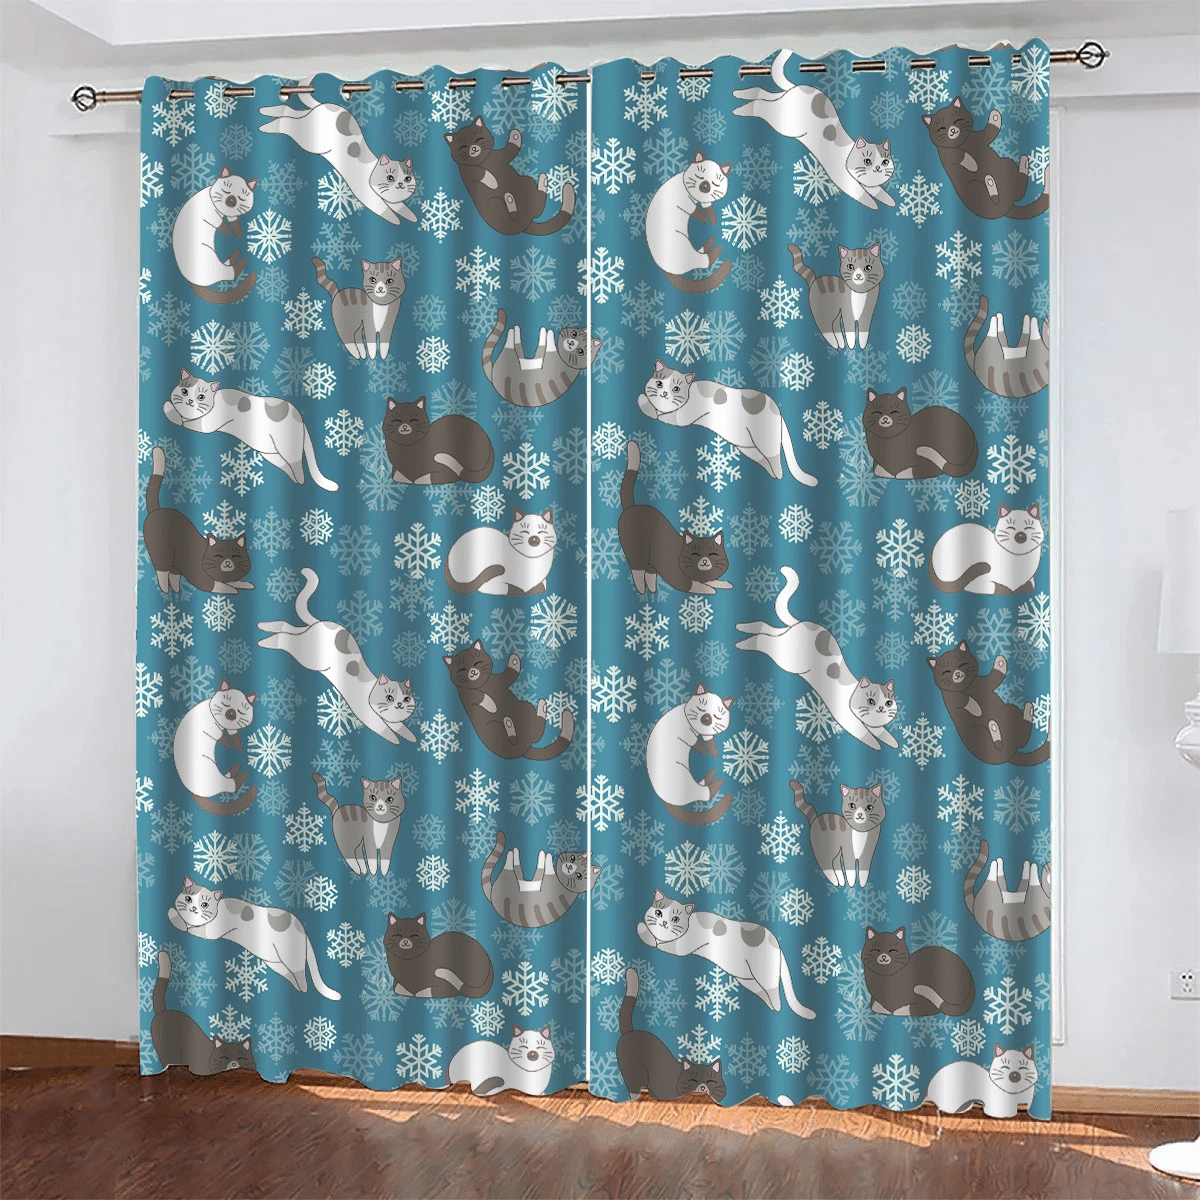 Sleeping And Playing Cat On Blue Snowflakes Window Curtains Door Curtains Home Decor